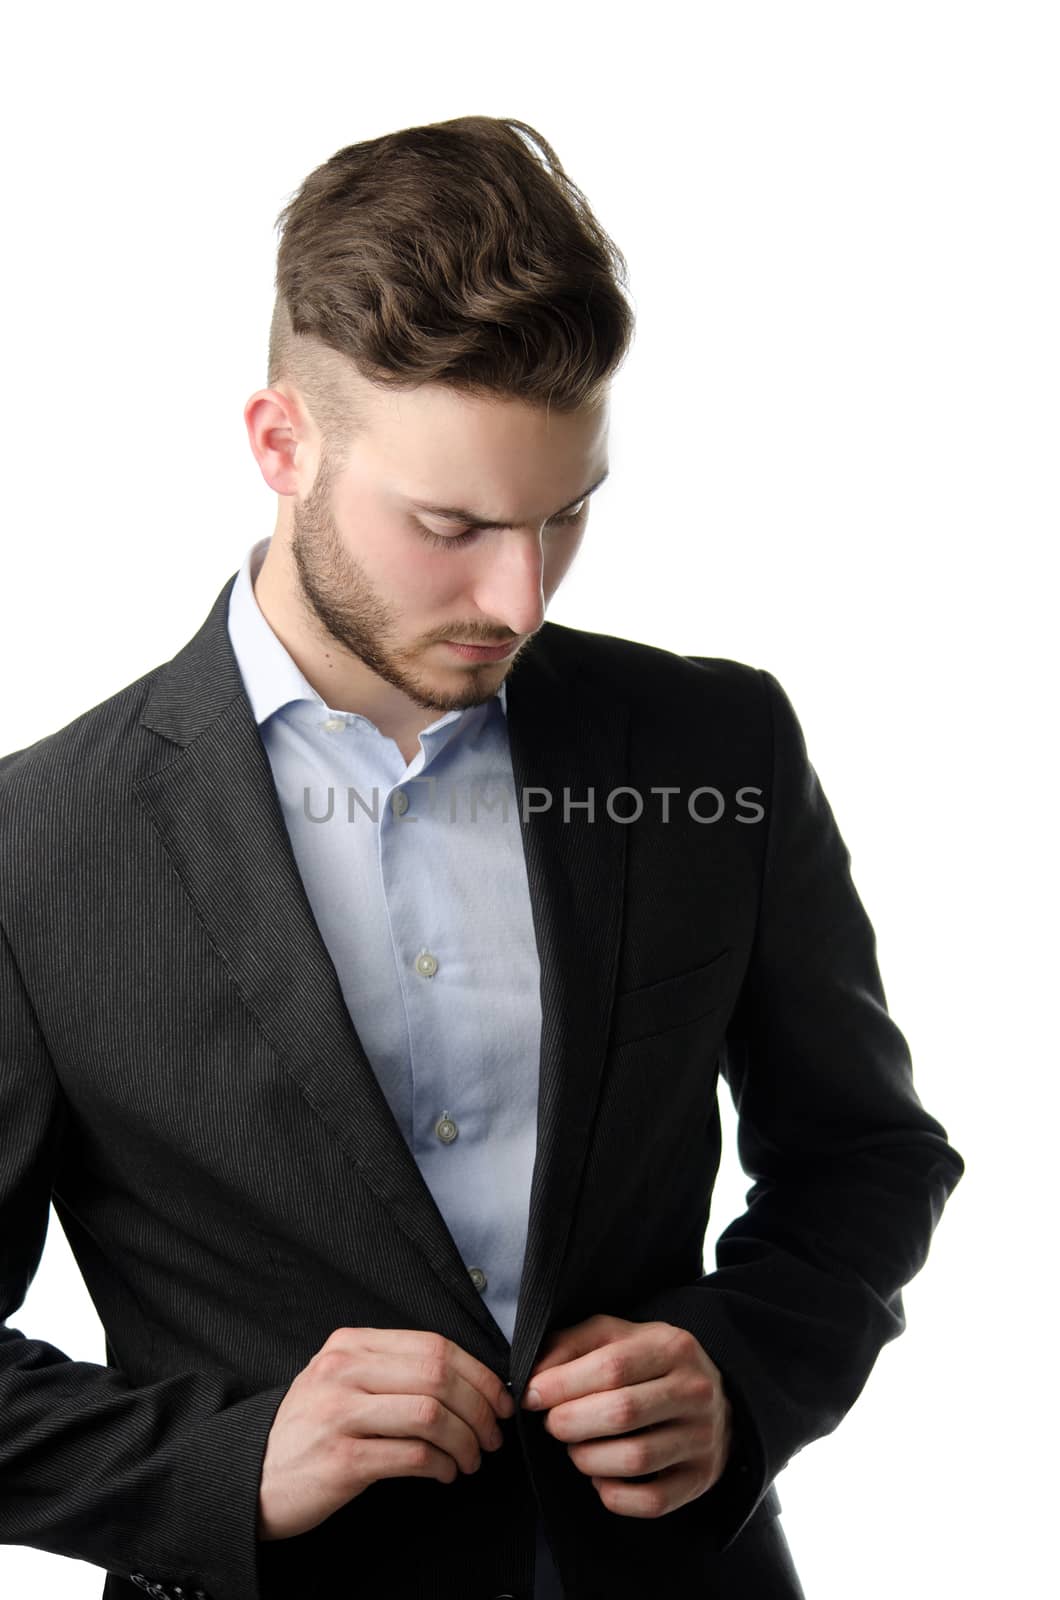 Attractive young man in suit buttoning up elegant jacket, isolated on white